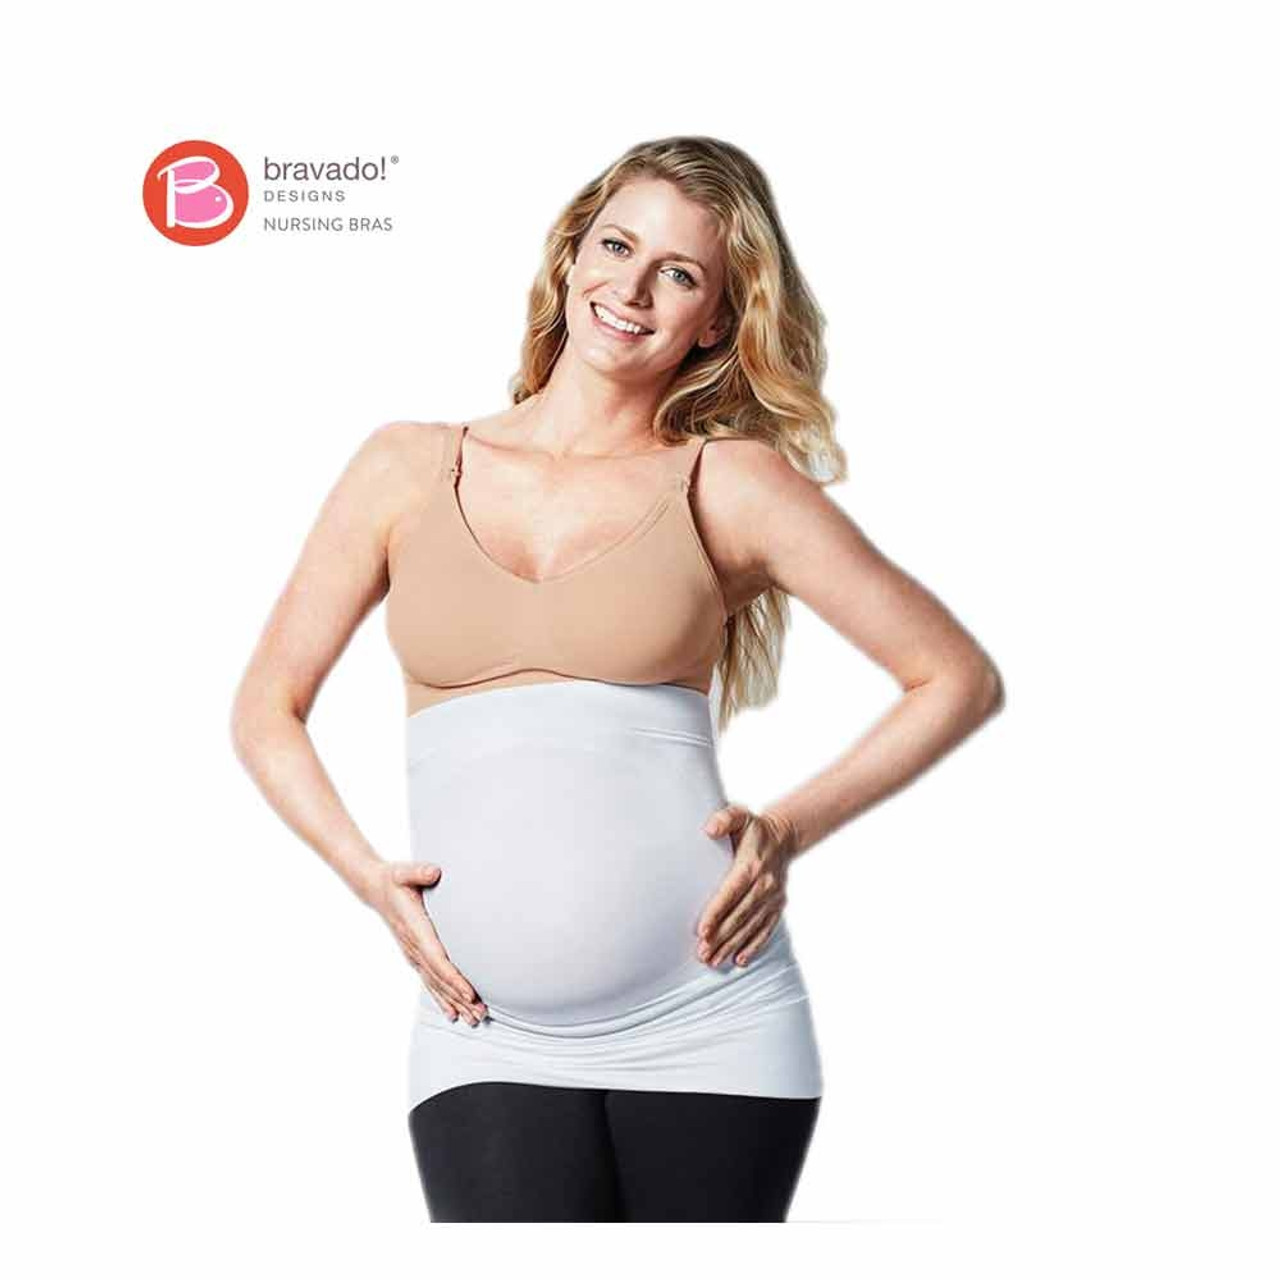 https://cdn11.bigcommerce.com/s-p6xvlcn3x2/images/stencil/1280x1280/products/17007/285287/Bravado-Belly-and-Back-Pregnancy-Support-Band-White-_244176__51067.1670446665.jpg?c=1